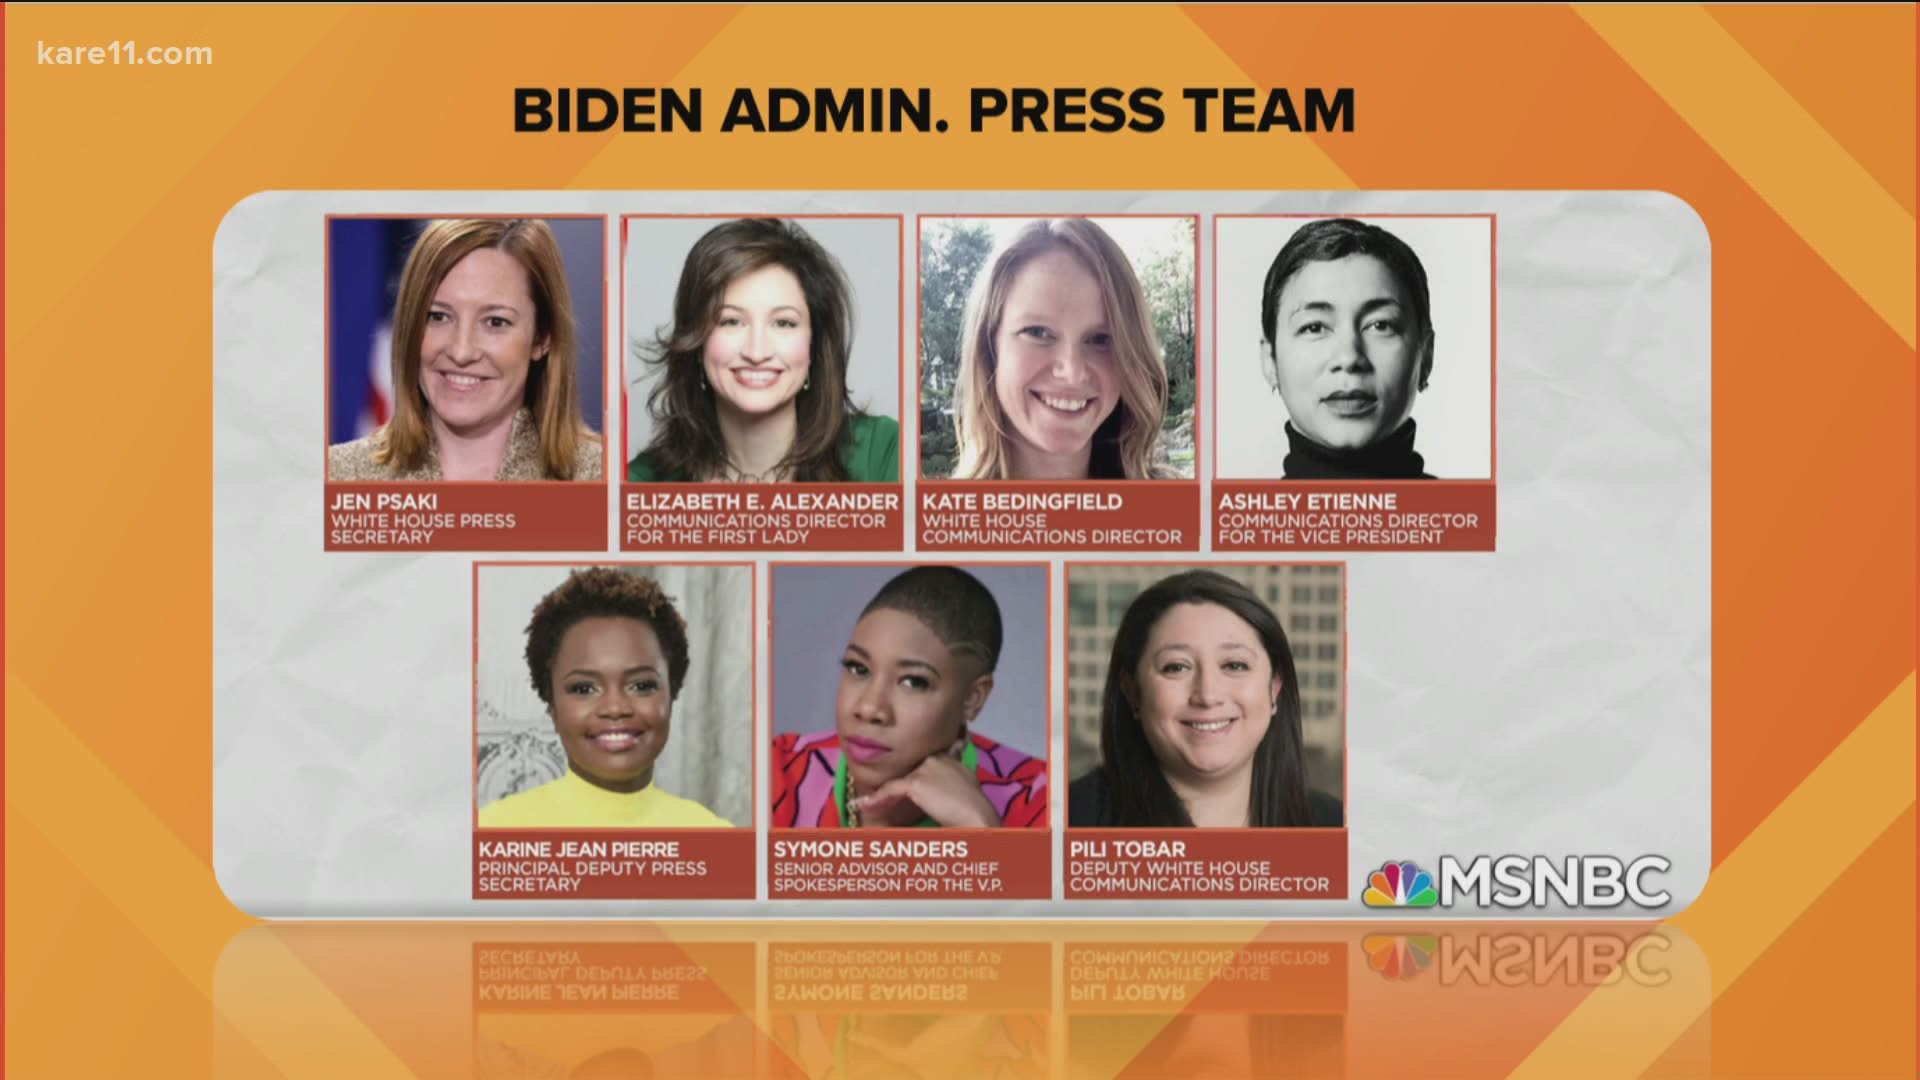 Biden also announced that his press team will be made up of all women.